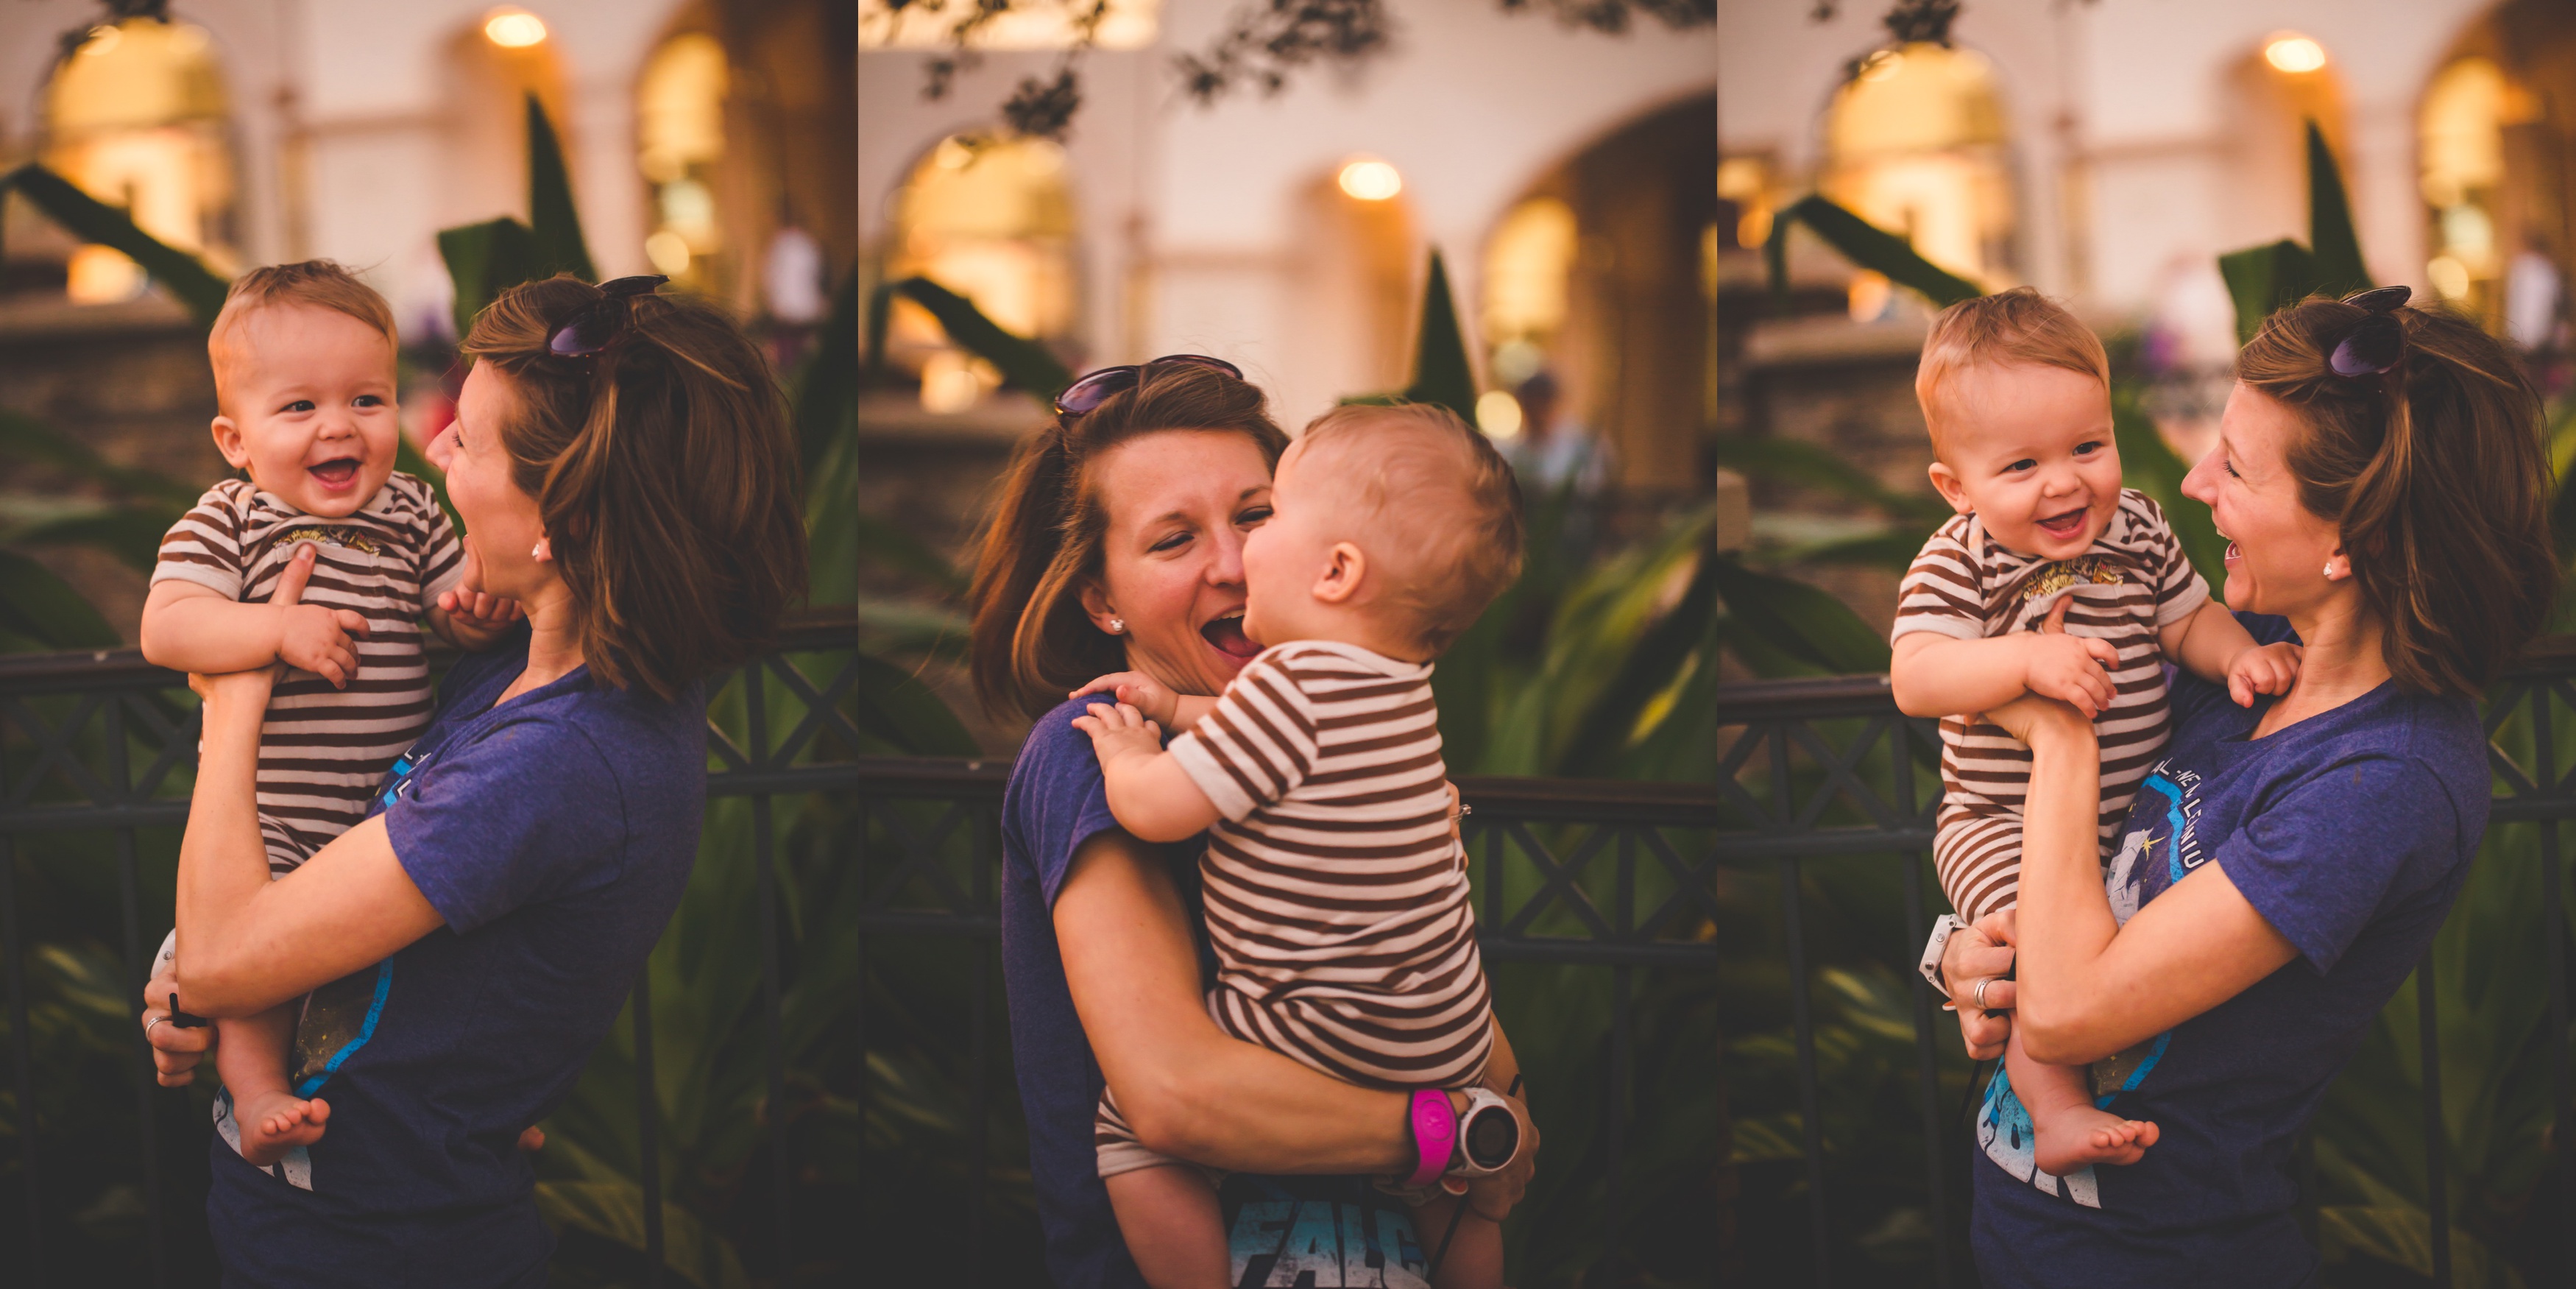 Camera and Photography tips for families at Walt Disney World, Disney, Magic for Miles